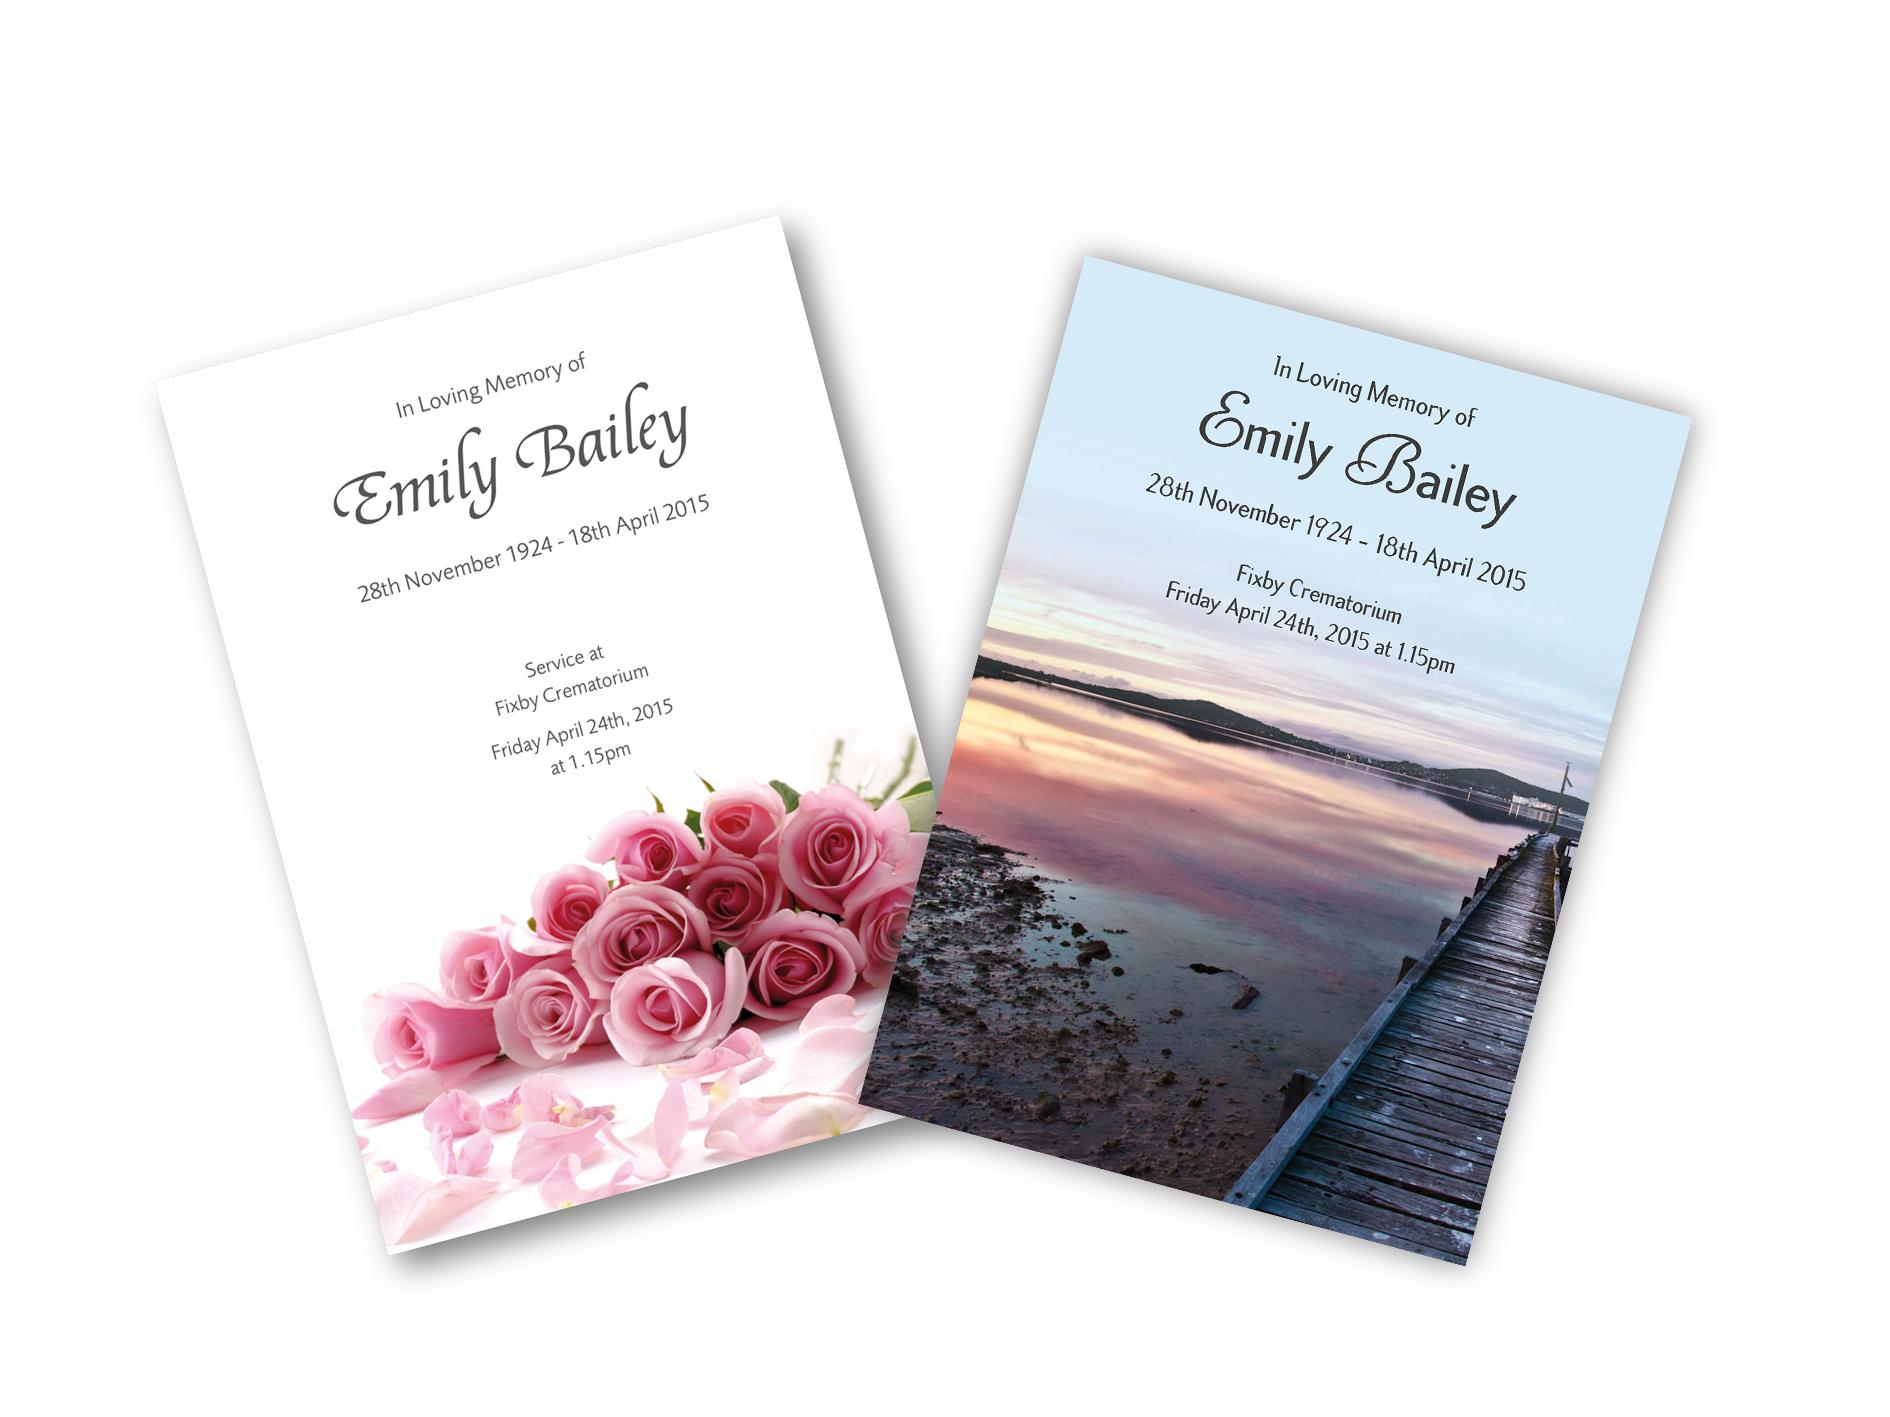 Funeral Service Sheets designed and printed